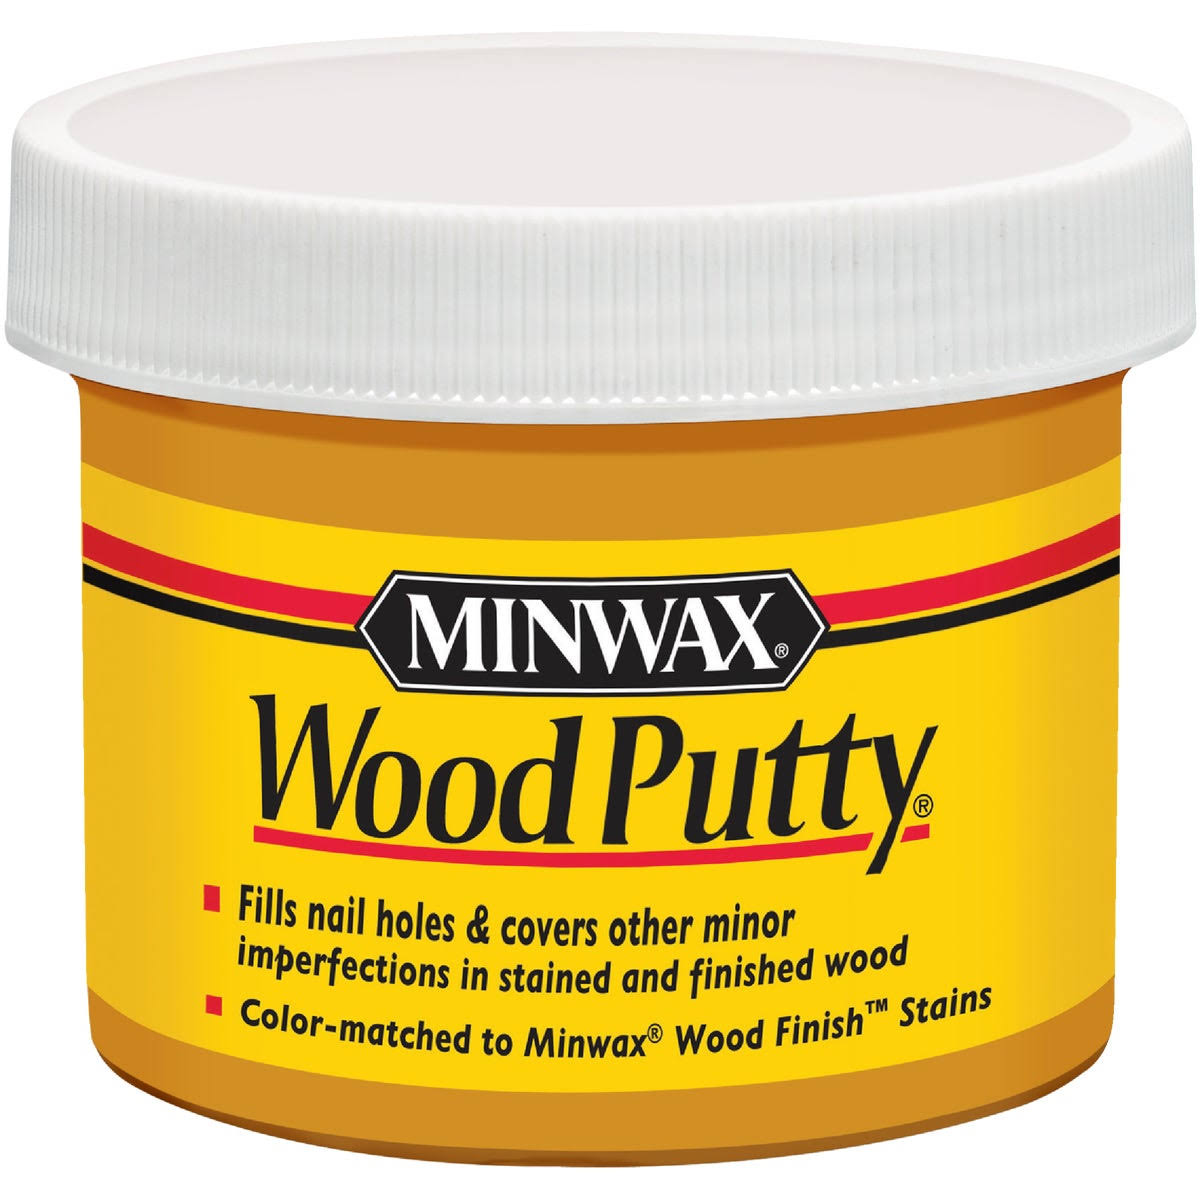 Minwax Wood Putty - Colonial Maple, 3.75oz